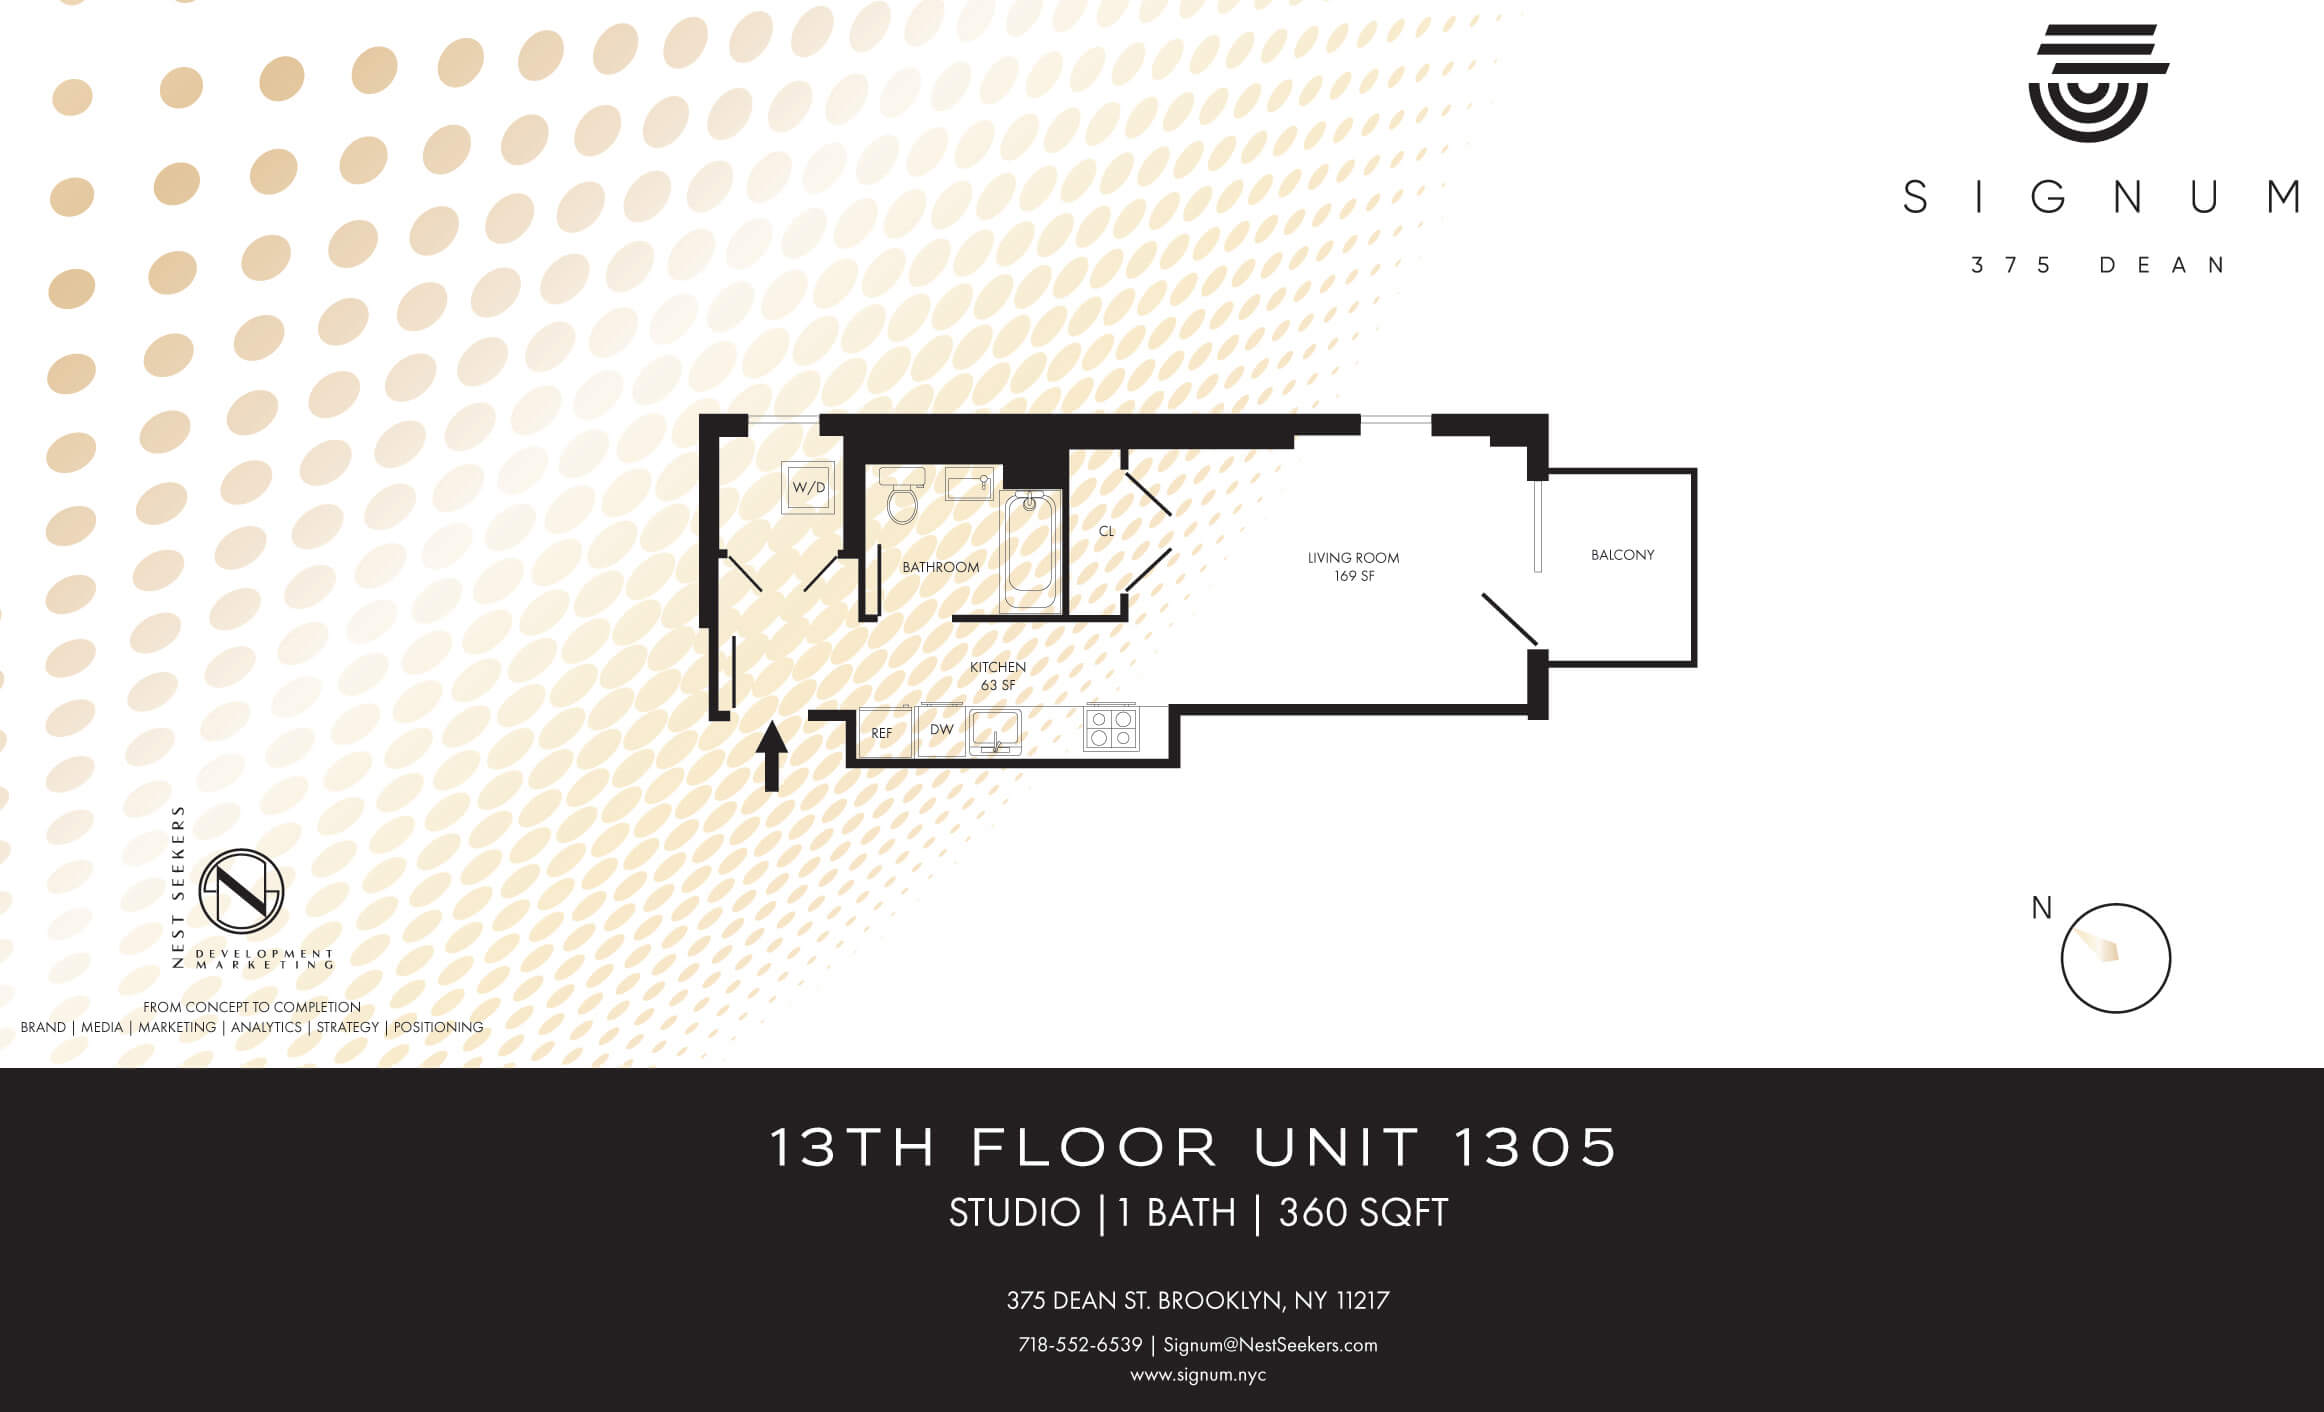 floor plan showing a studio with a balcony